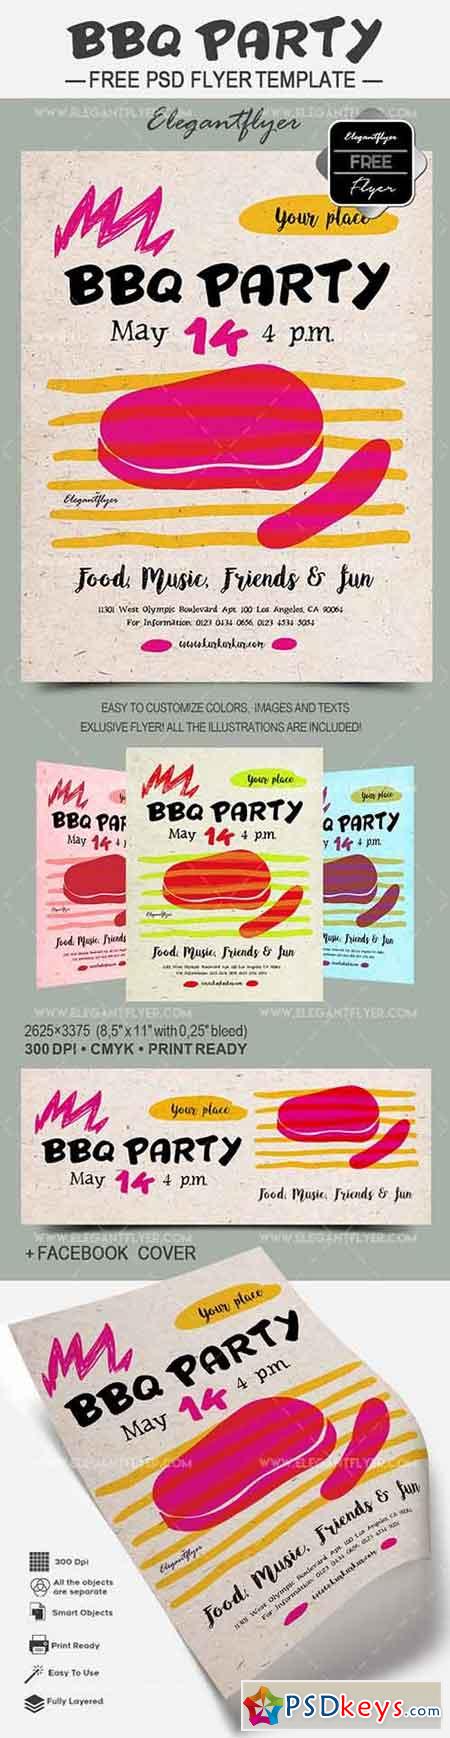 BBQ Party  Free Flyer PSD Template + Facebook Cover 1